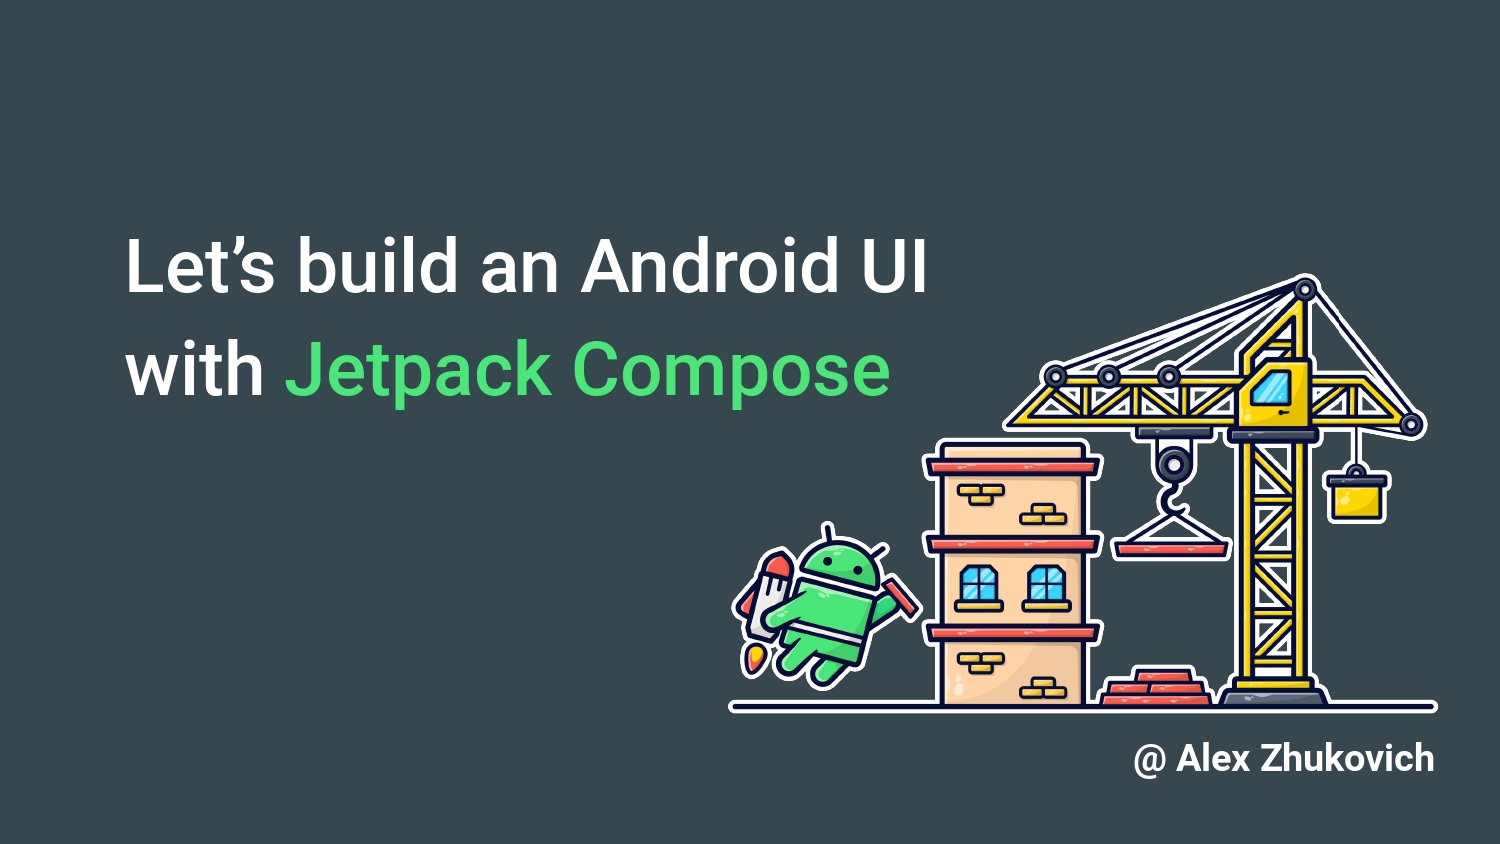 Let’s build an Android UI with Jetpack Compose by Alex Zhukovich